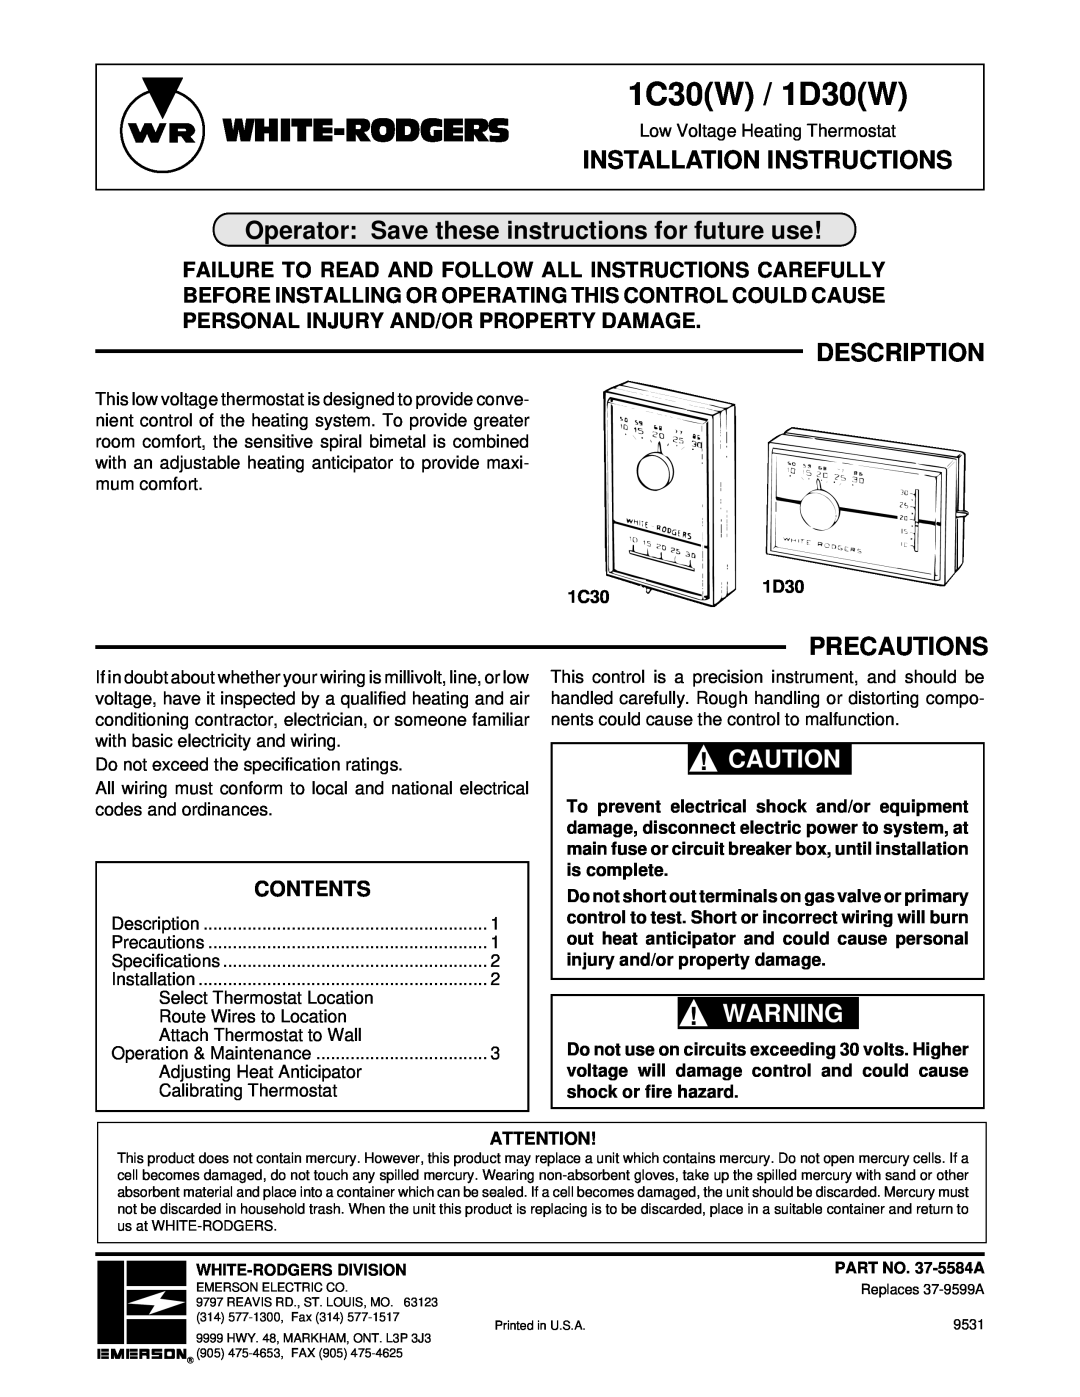 White Rodgers 1C30(W) installation instructions 1C30W / 1D30W, Operator Save these instructions for future use, Contents 